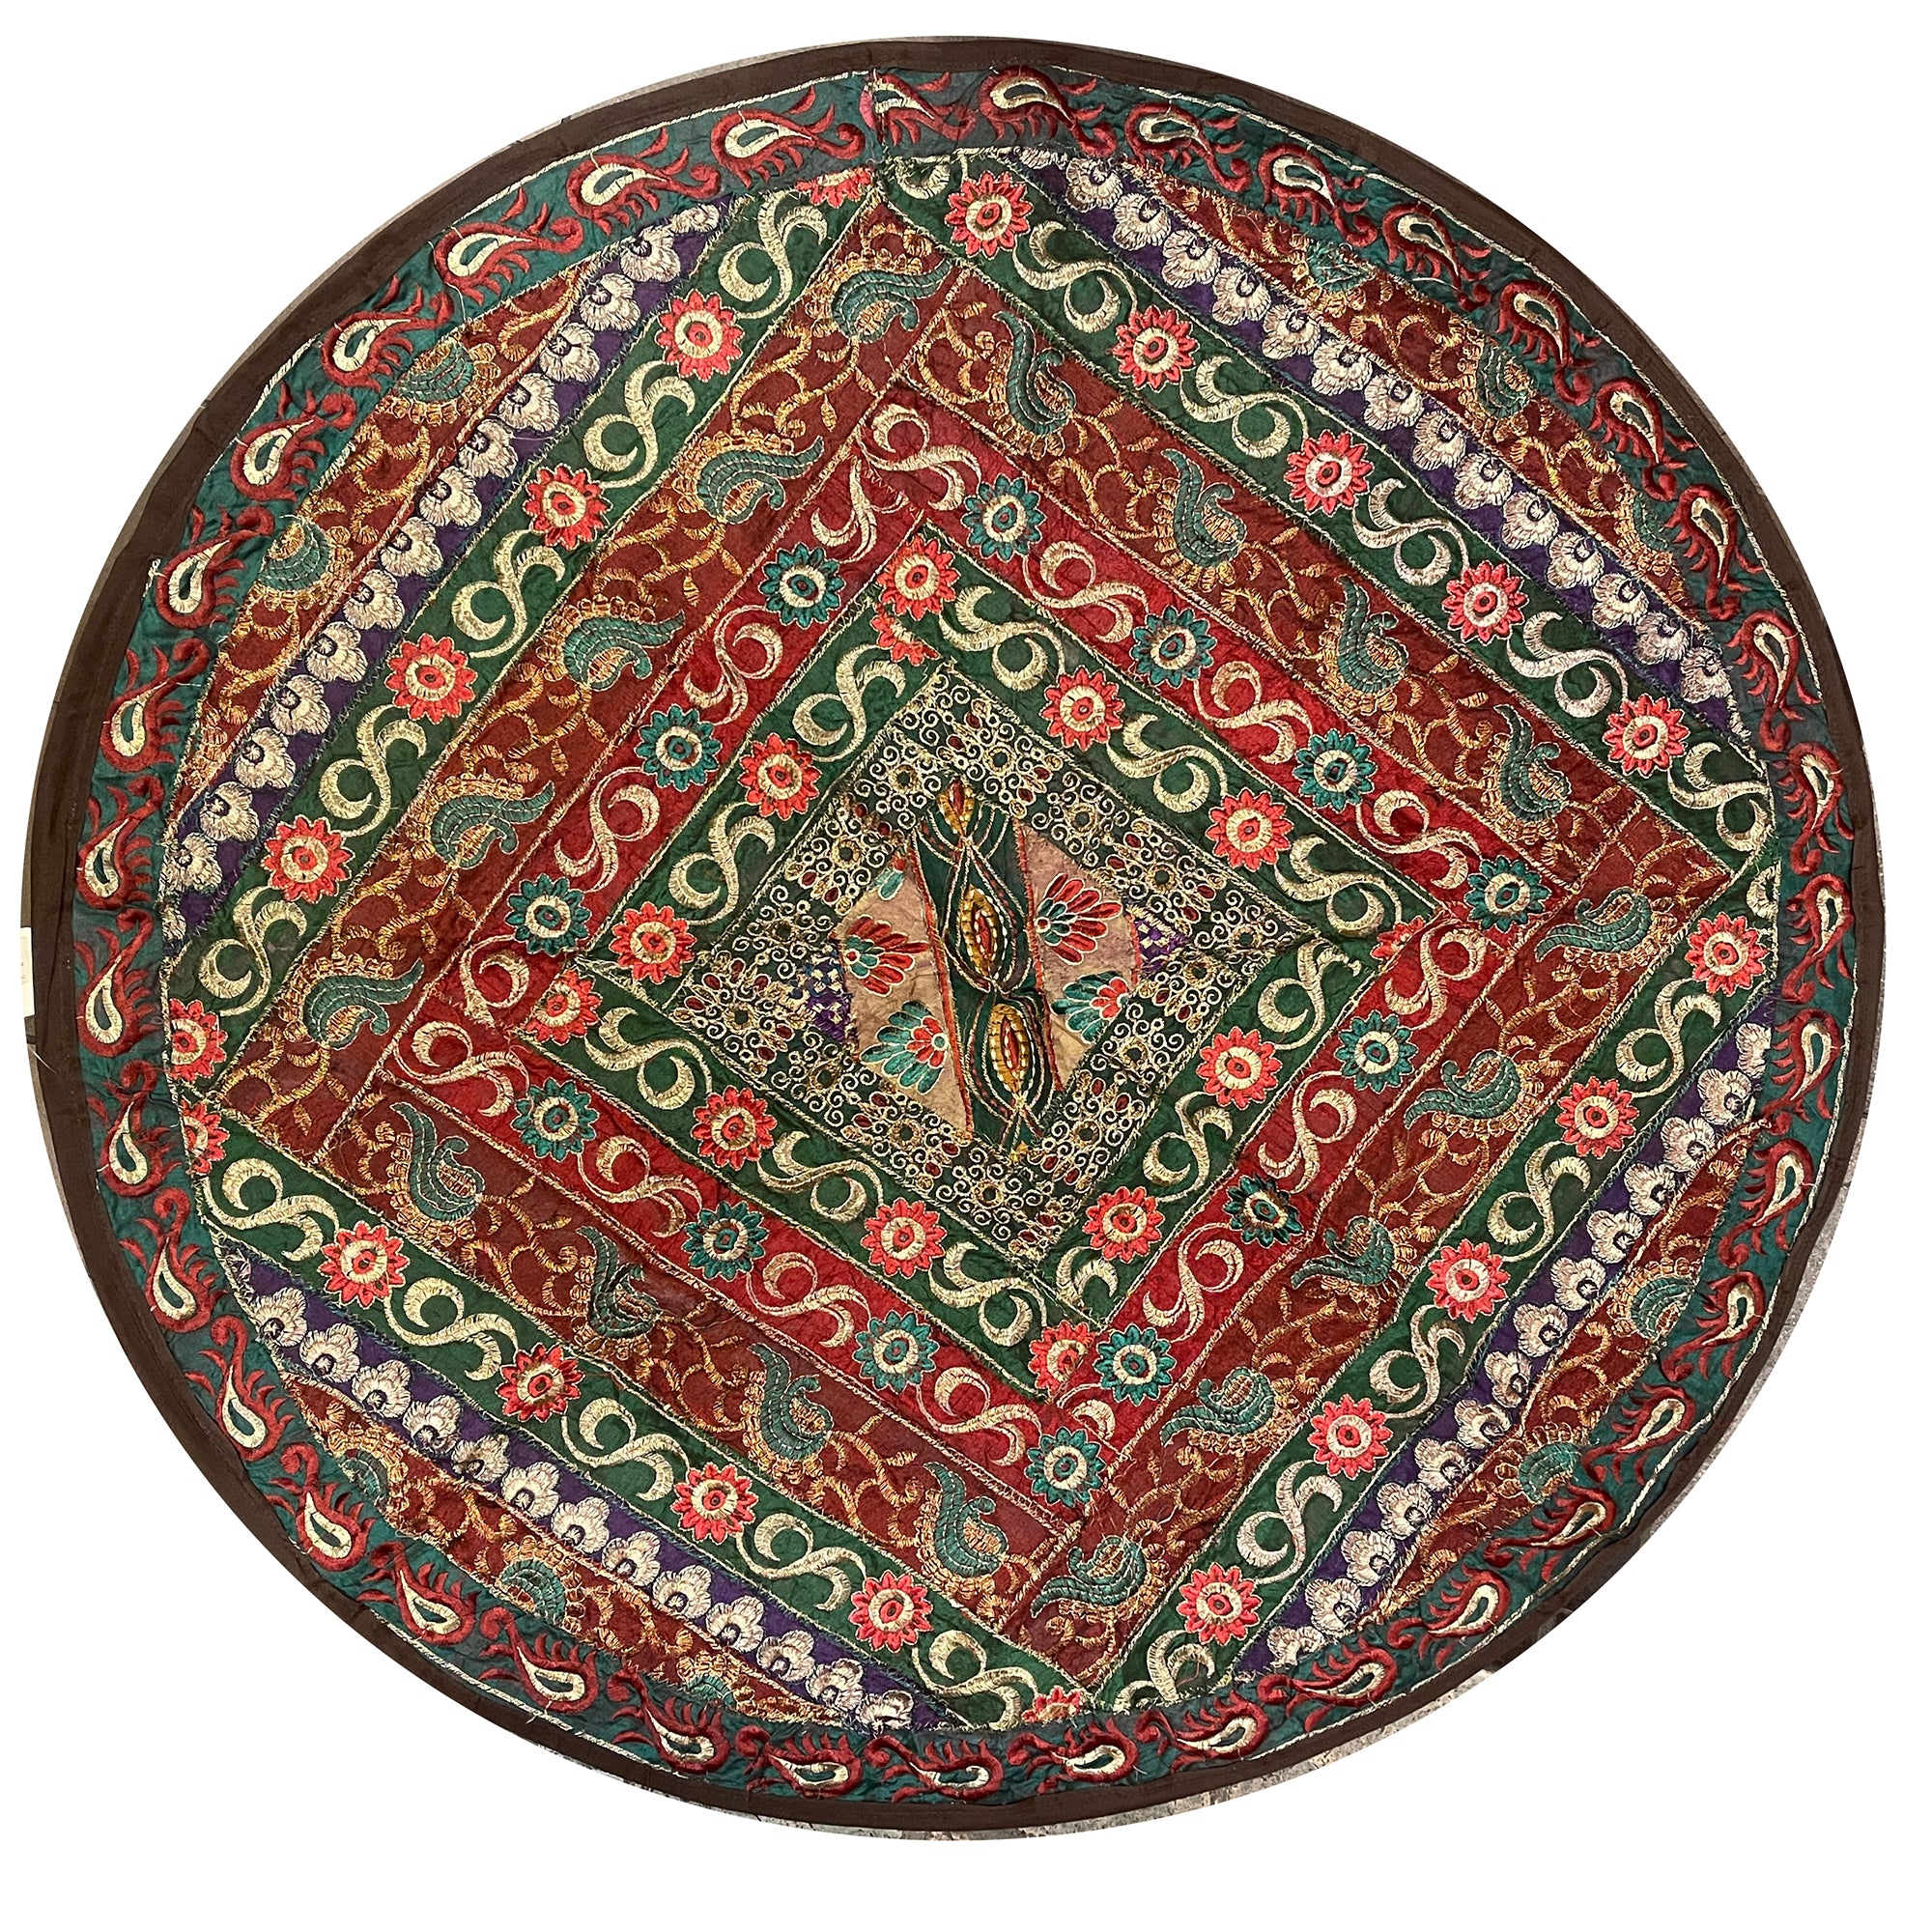 Round Wall Hanging/Table Decor  8993 - Vintage India NYC